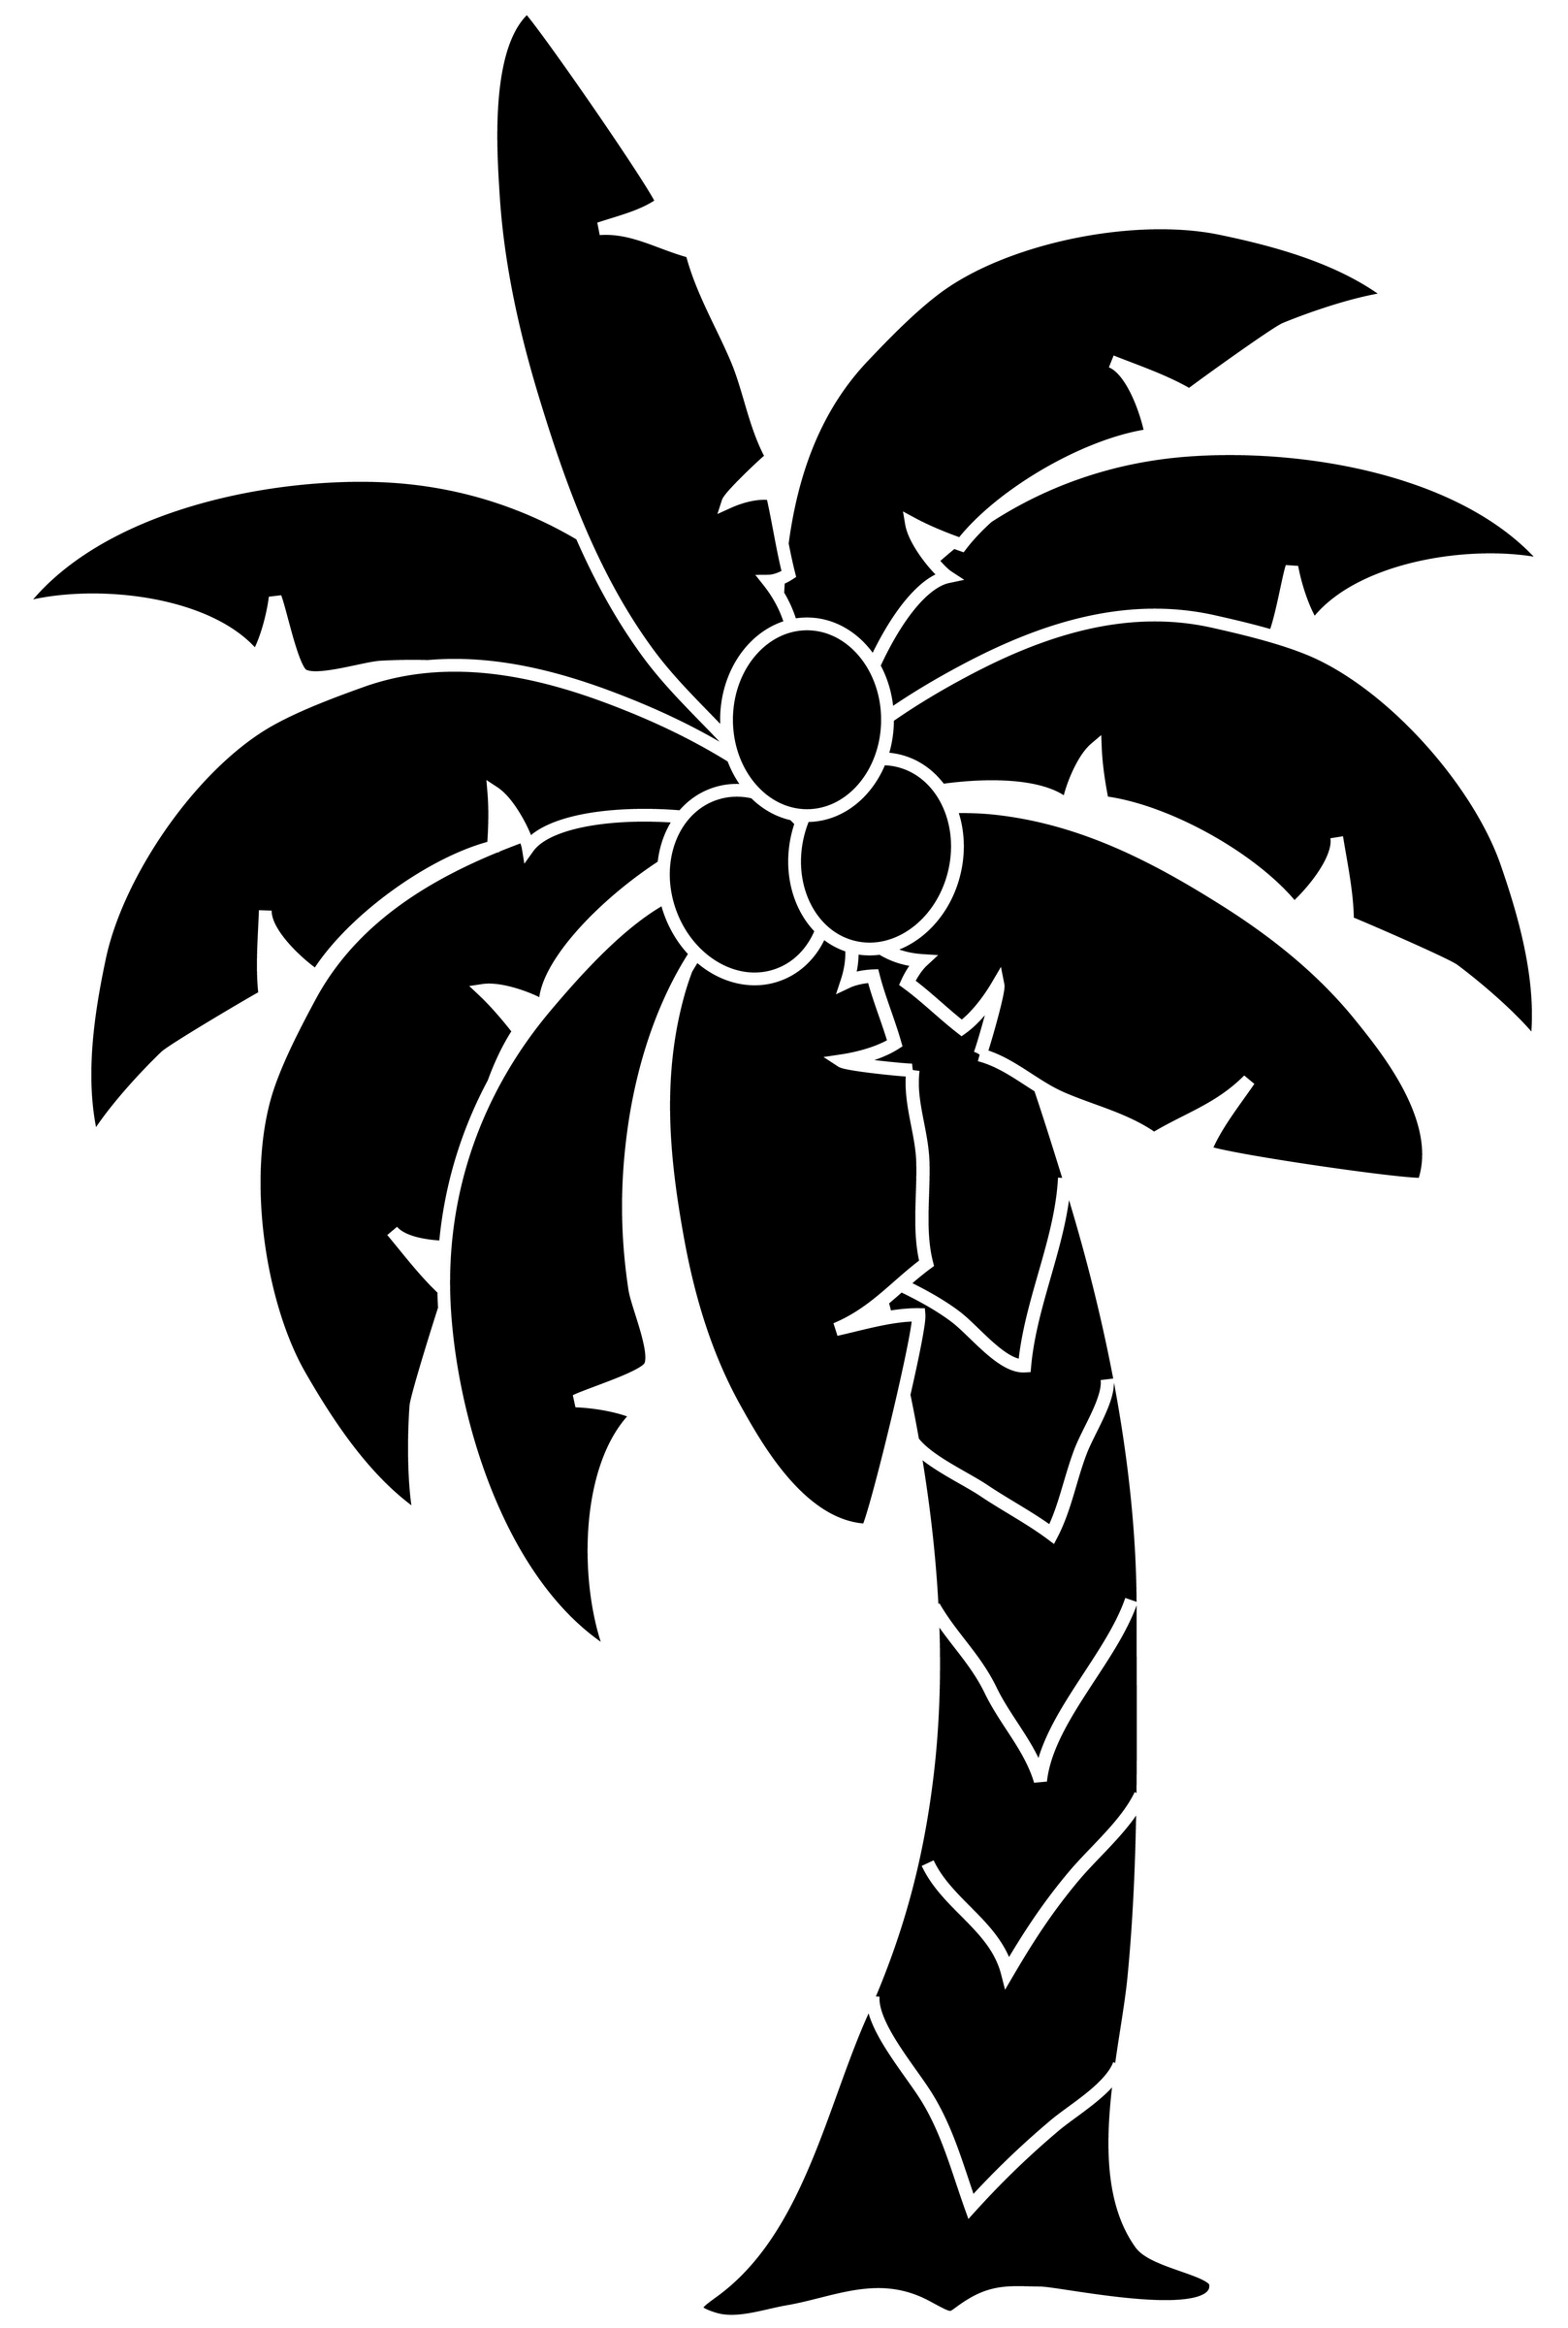 Palm trees annual soiree island fever clipart free clip art images